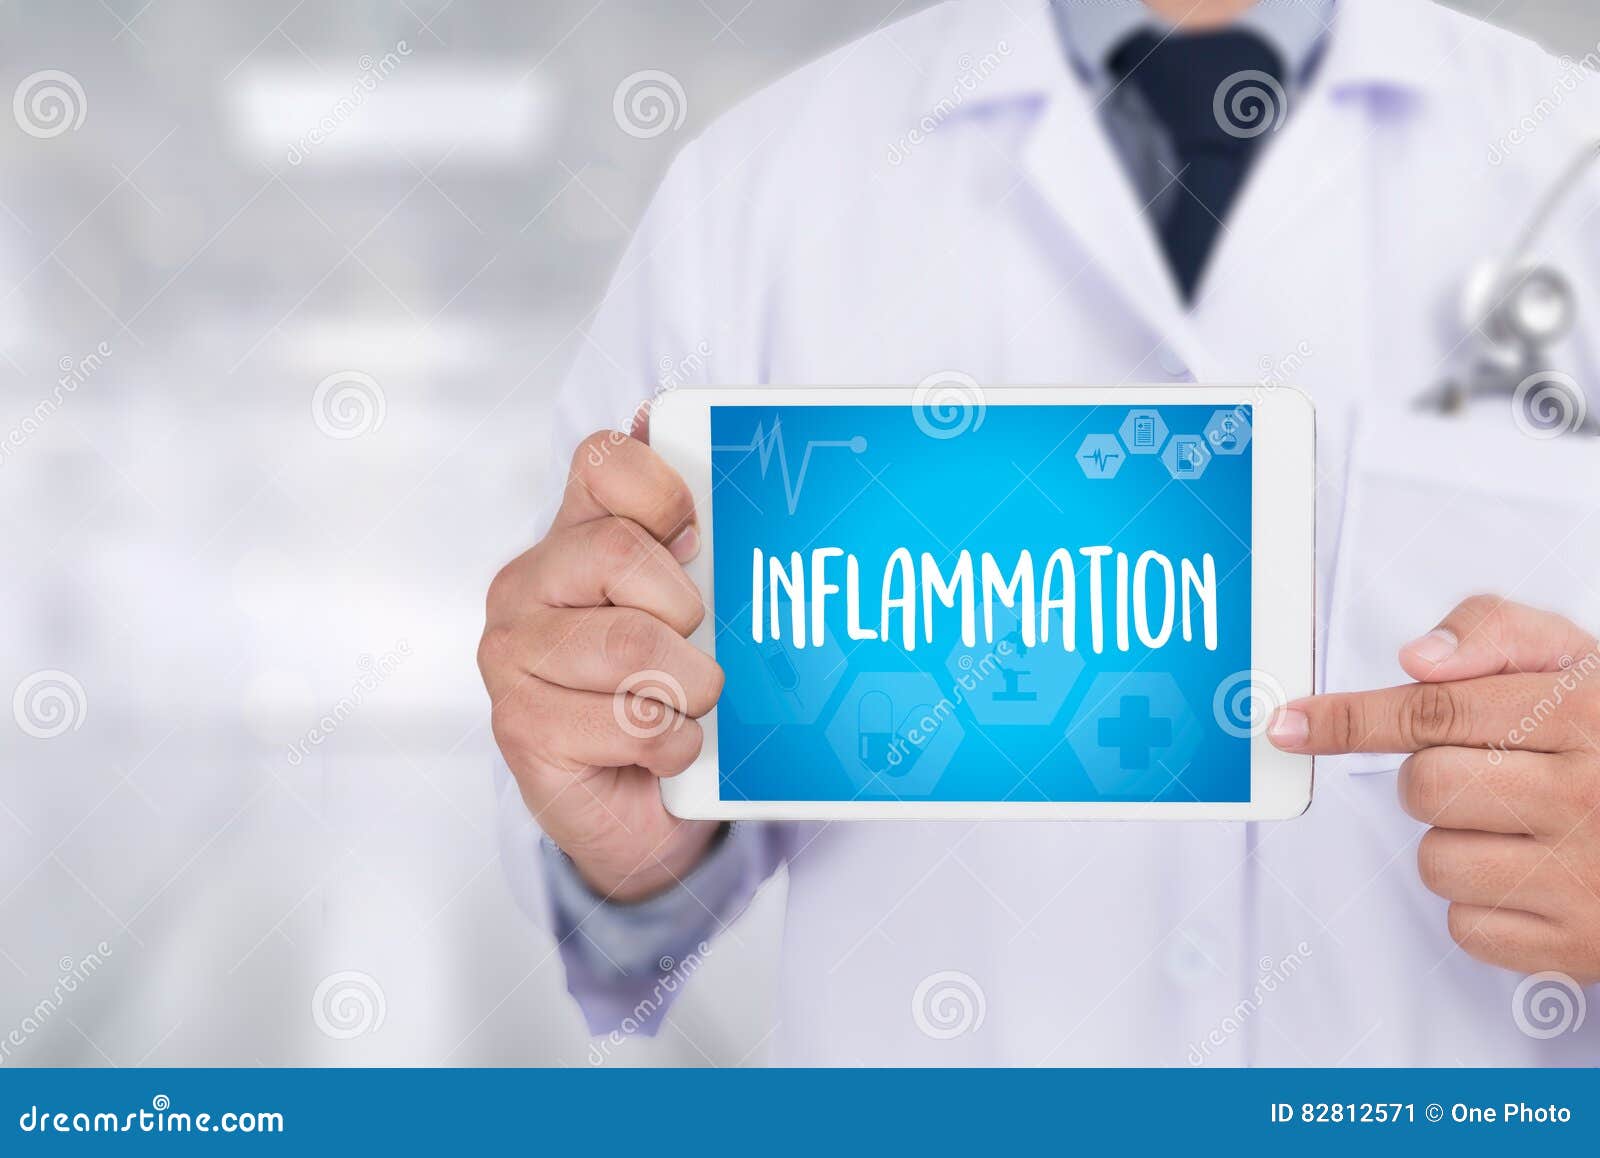 inflammation joint inflammation concept , inflammation - medi